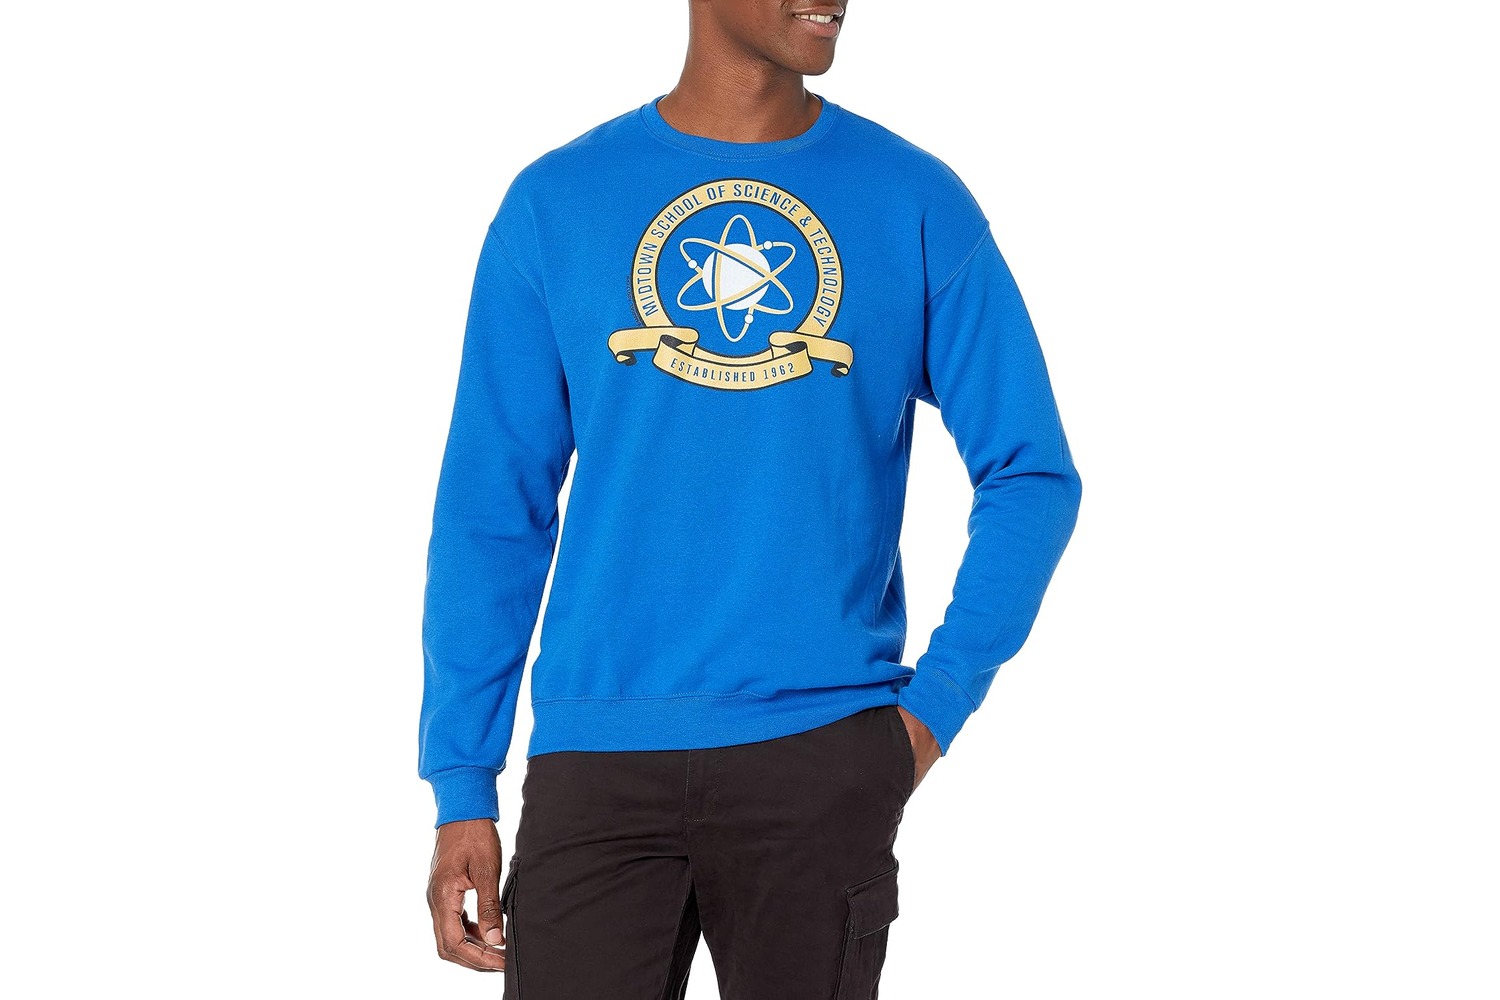 9-best-midtown-school-of-science-and-technology-sweatshirt-for-2023